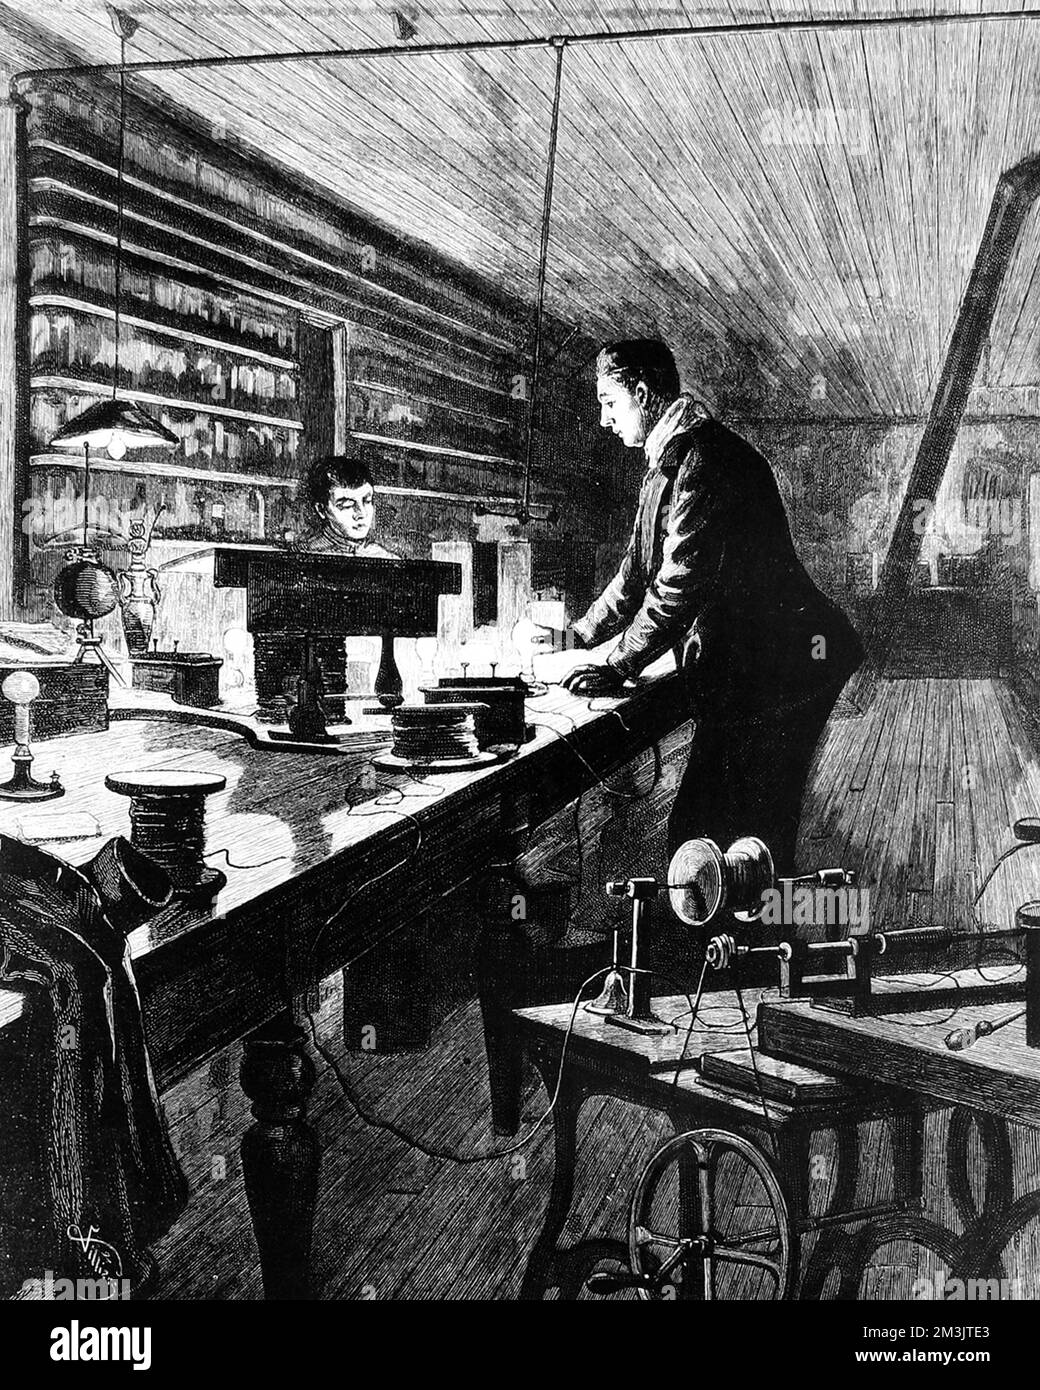 Sketch by Frederic Villiers showing Thomas Alva Edison (1847-1931) US inventor and physicist at work in his laboratory.  Edison was a prolific inventor and took out over 1000 patents, one of the most influential being the incandescent light bulb in 1879.     Date: 1880 Stock Photo